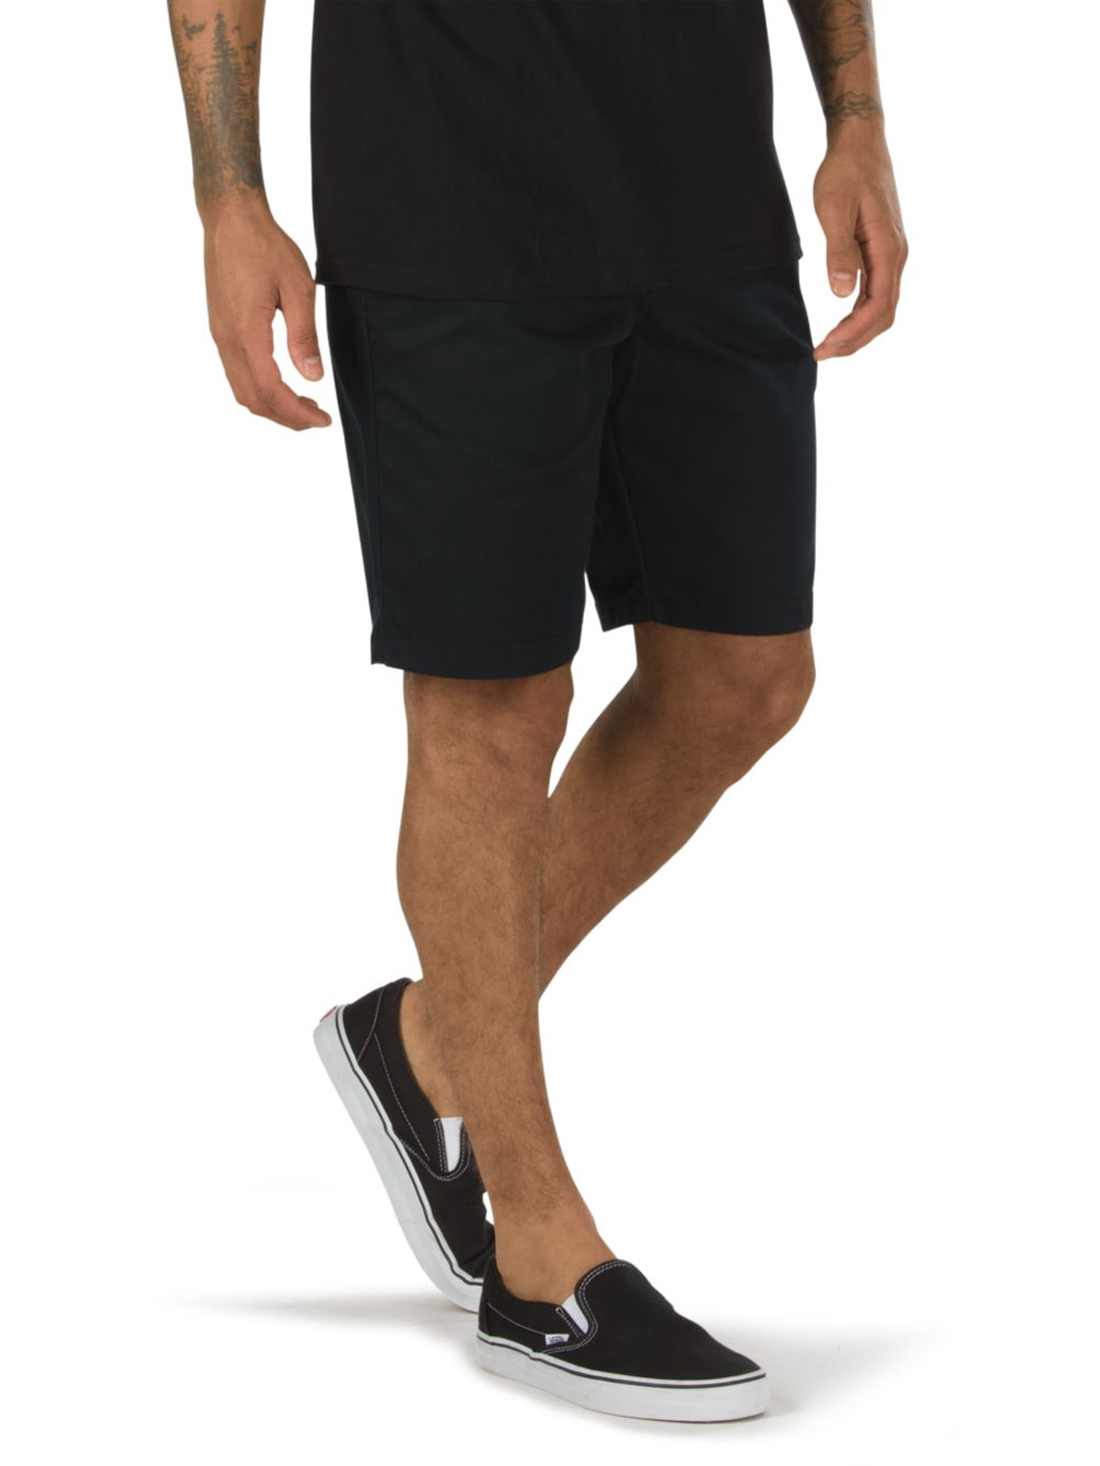 vans slip on with shorts